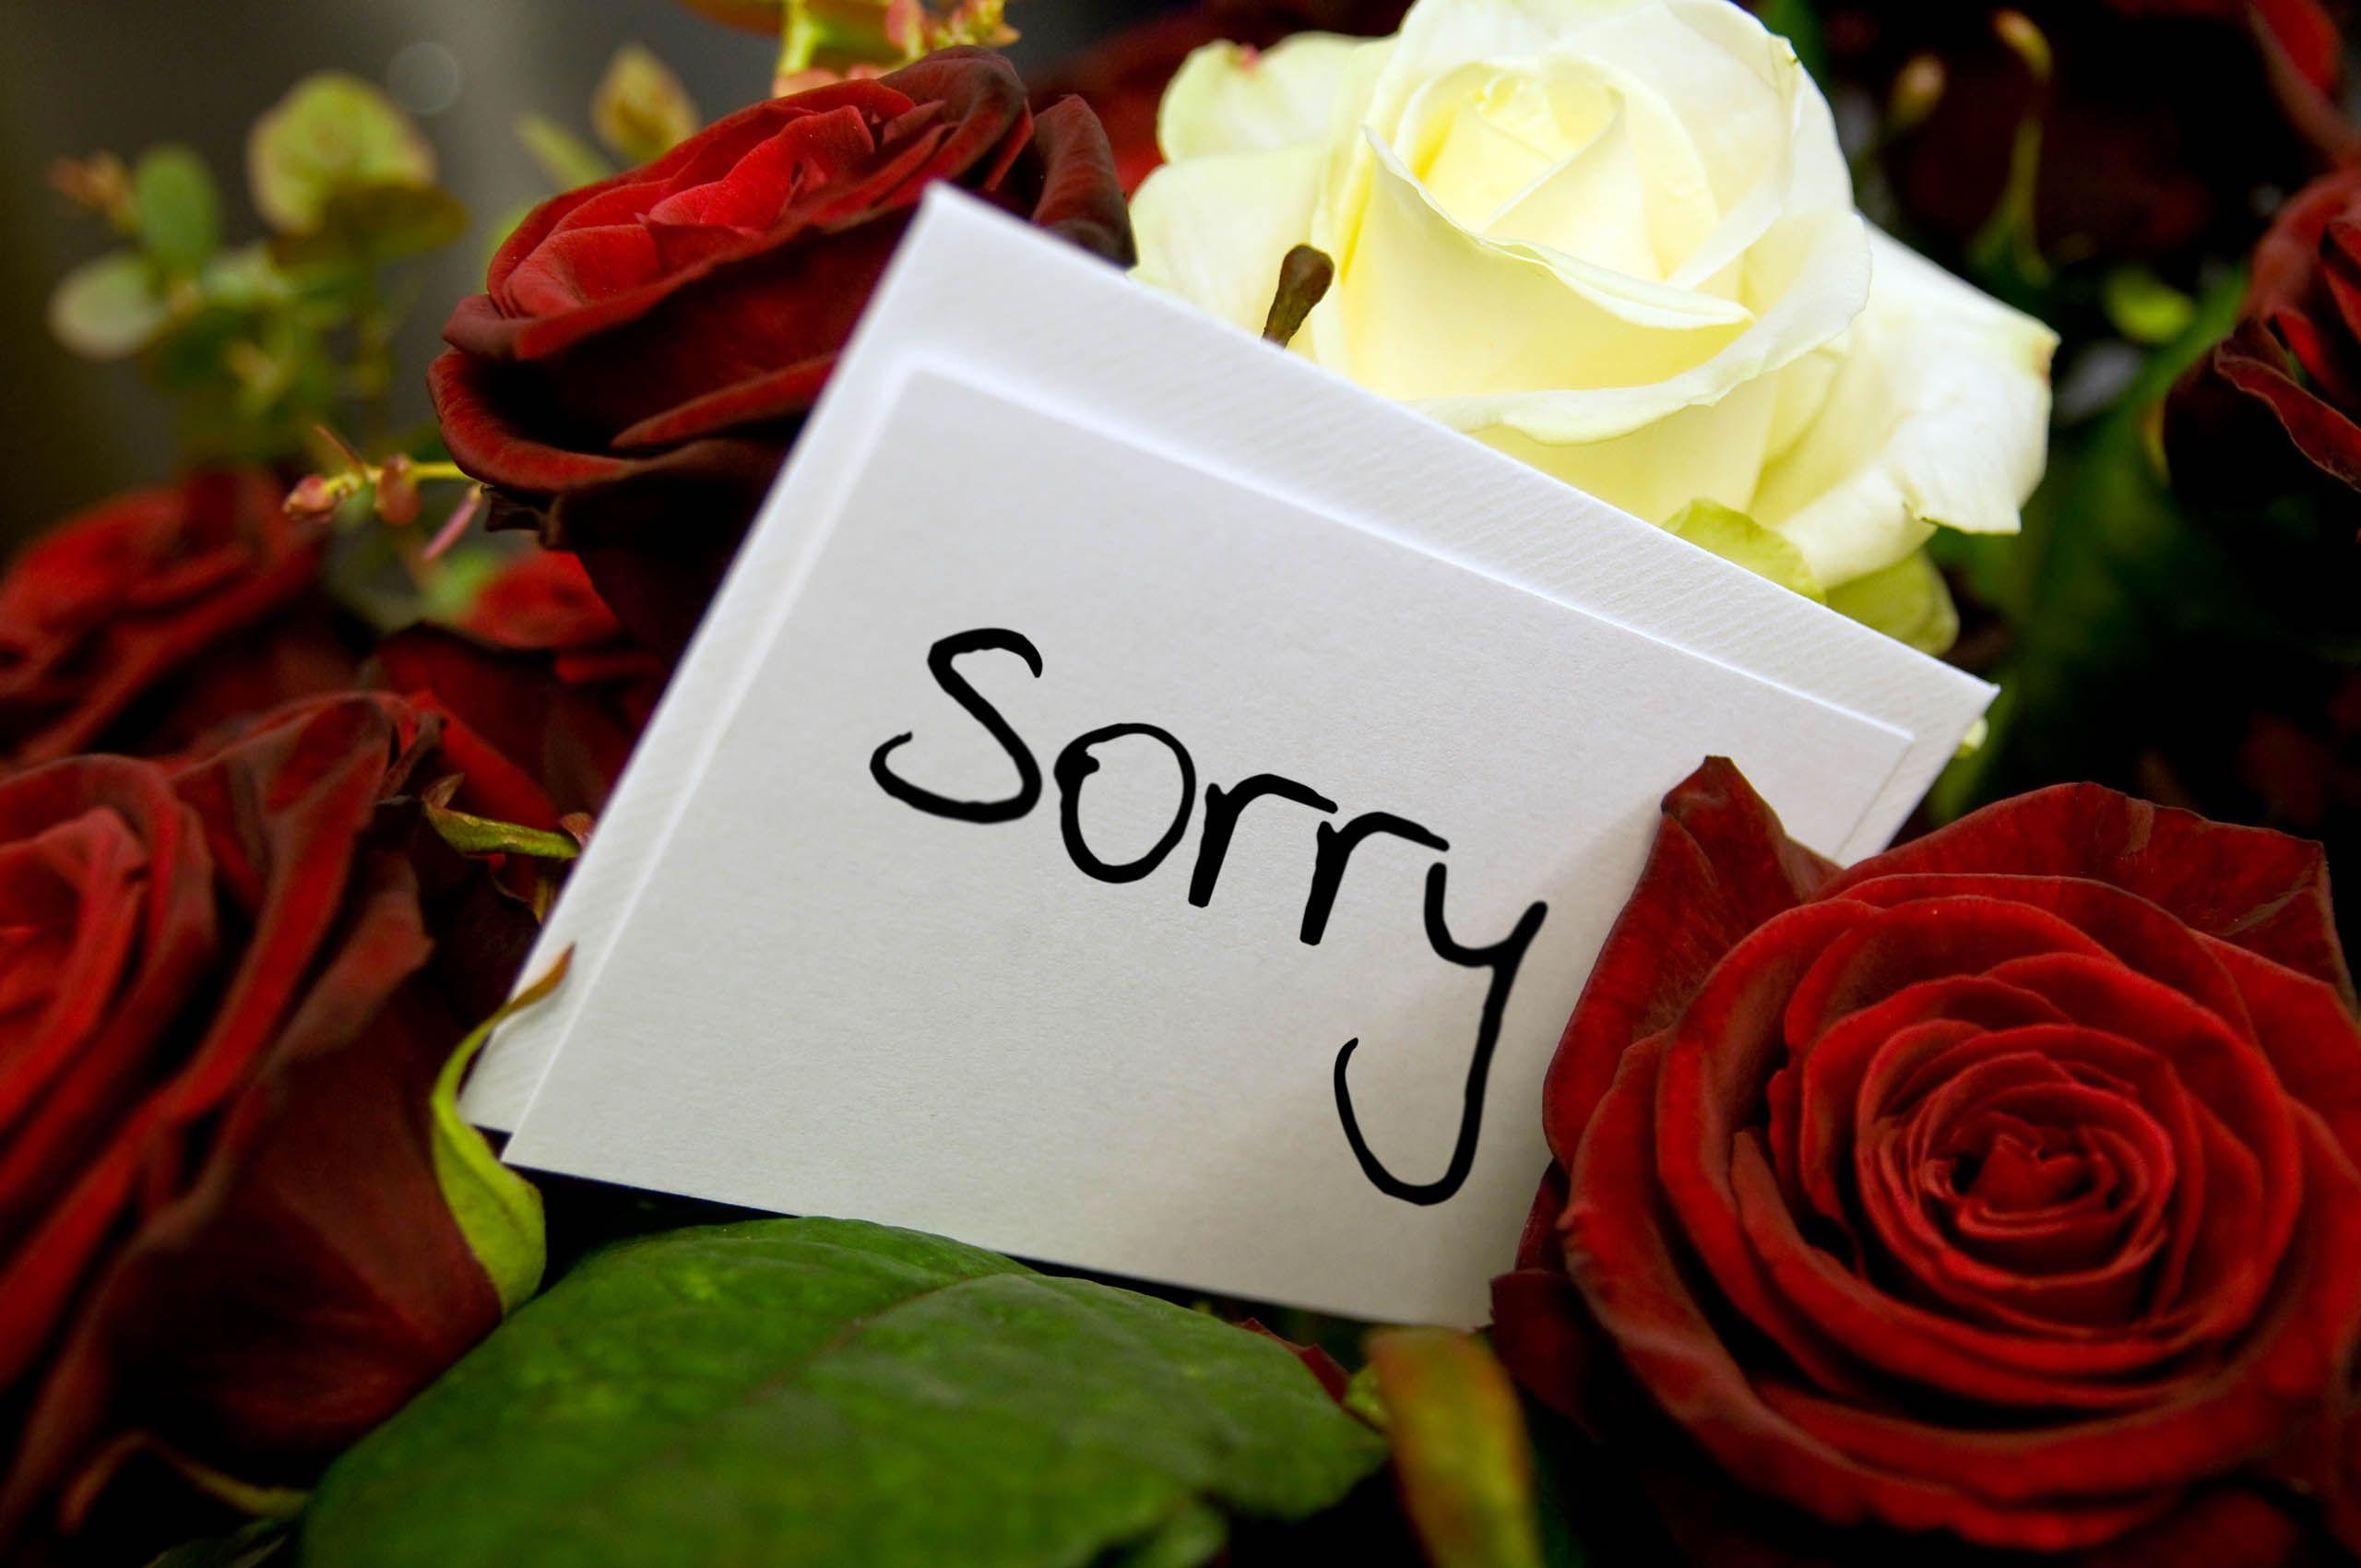 Sorry Hd Images For Android Apk Download